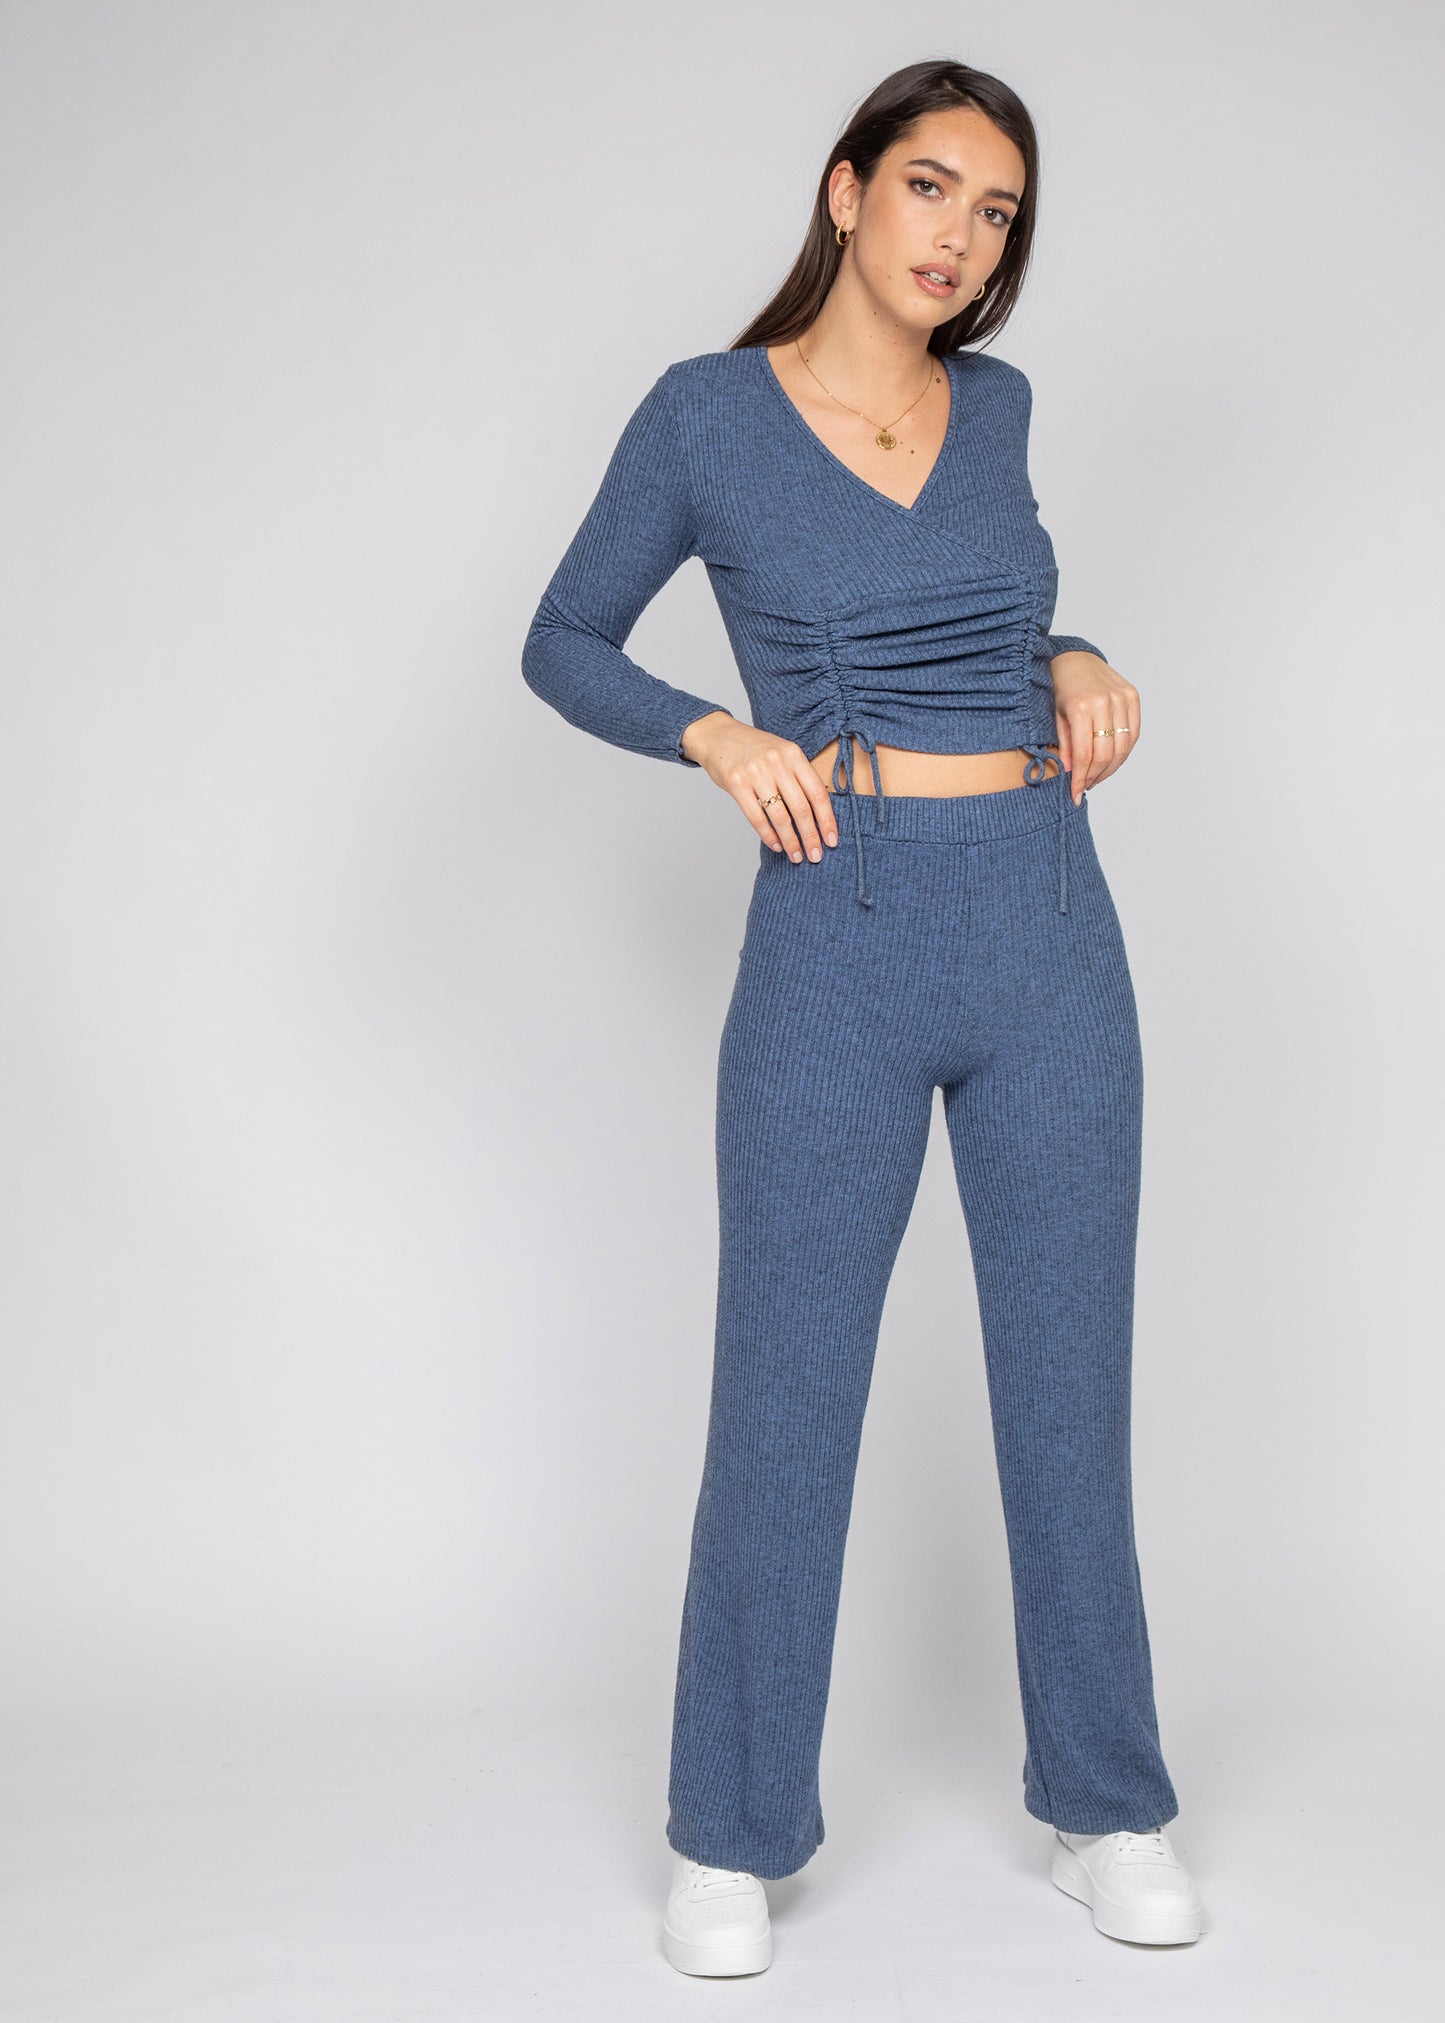 Ribbed wide leg trouser in blue